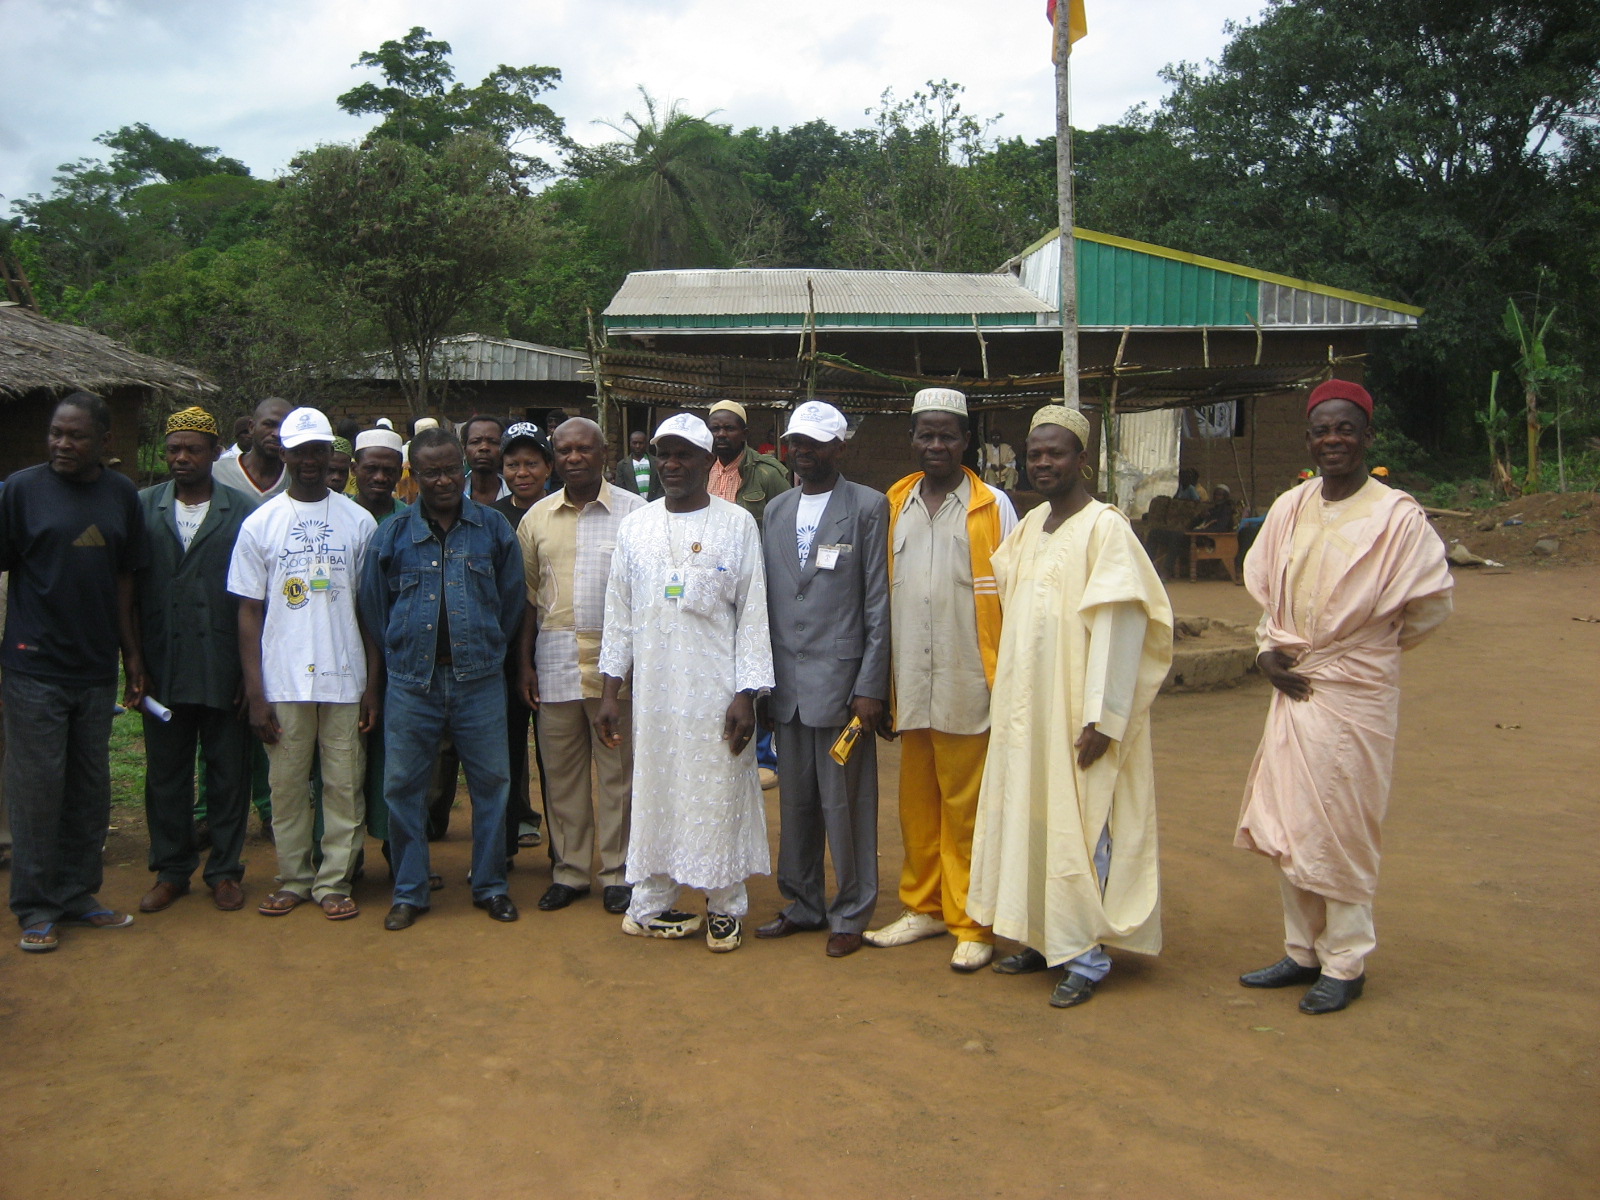 The village chief and Cameroon river blindness community distributors